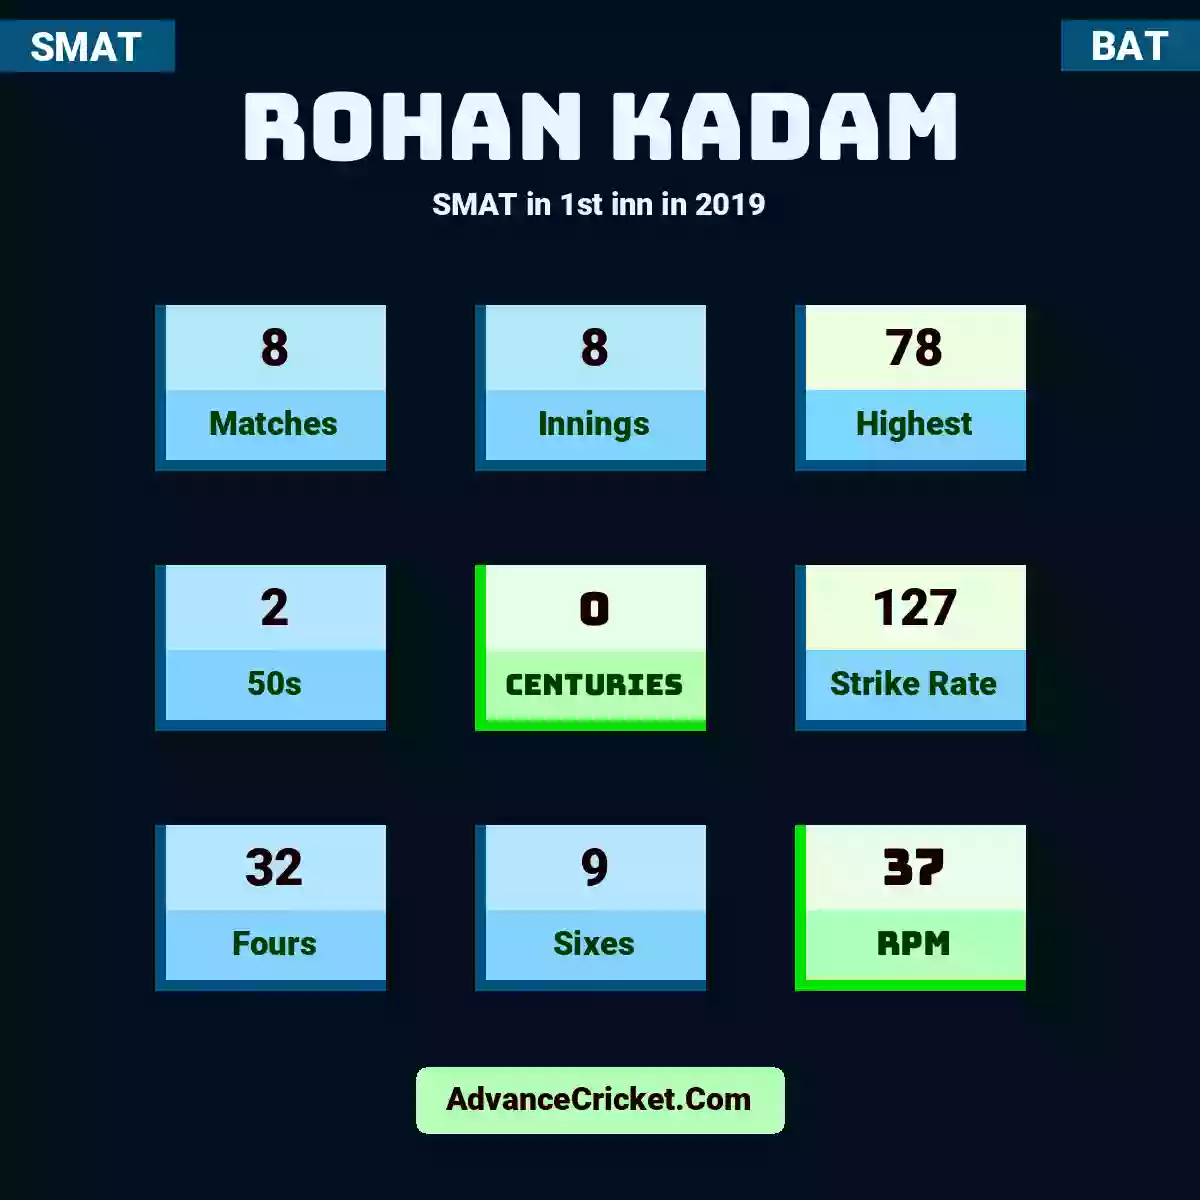 Rohan Kadam SMAT  in 1st inn in 2019, Rohan Kadam played 8 matches, scored 78 runs as highest, 2 half-centuries, and 0 centuries, with a strike rate of 127. R.Kadam hit 32 fours and 9 sixes, with an RPM of 37.